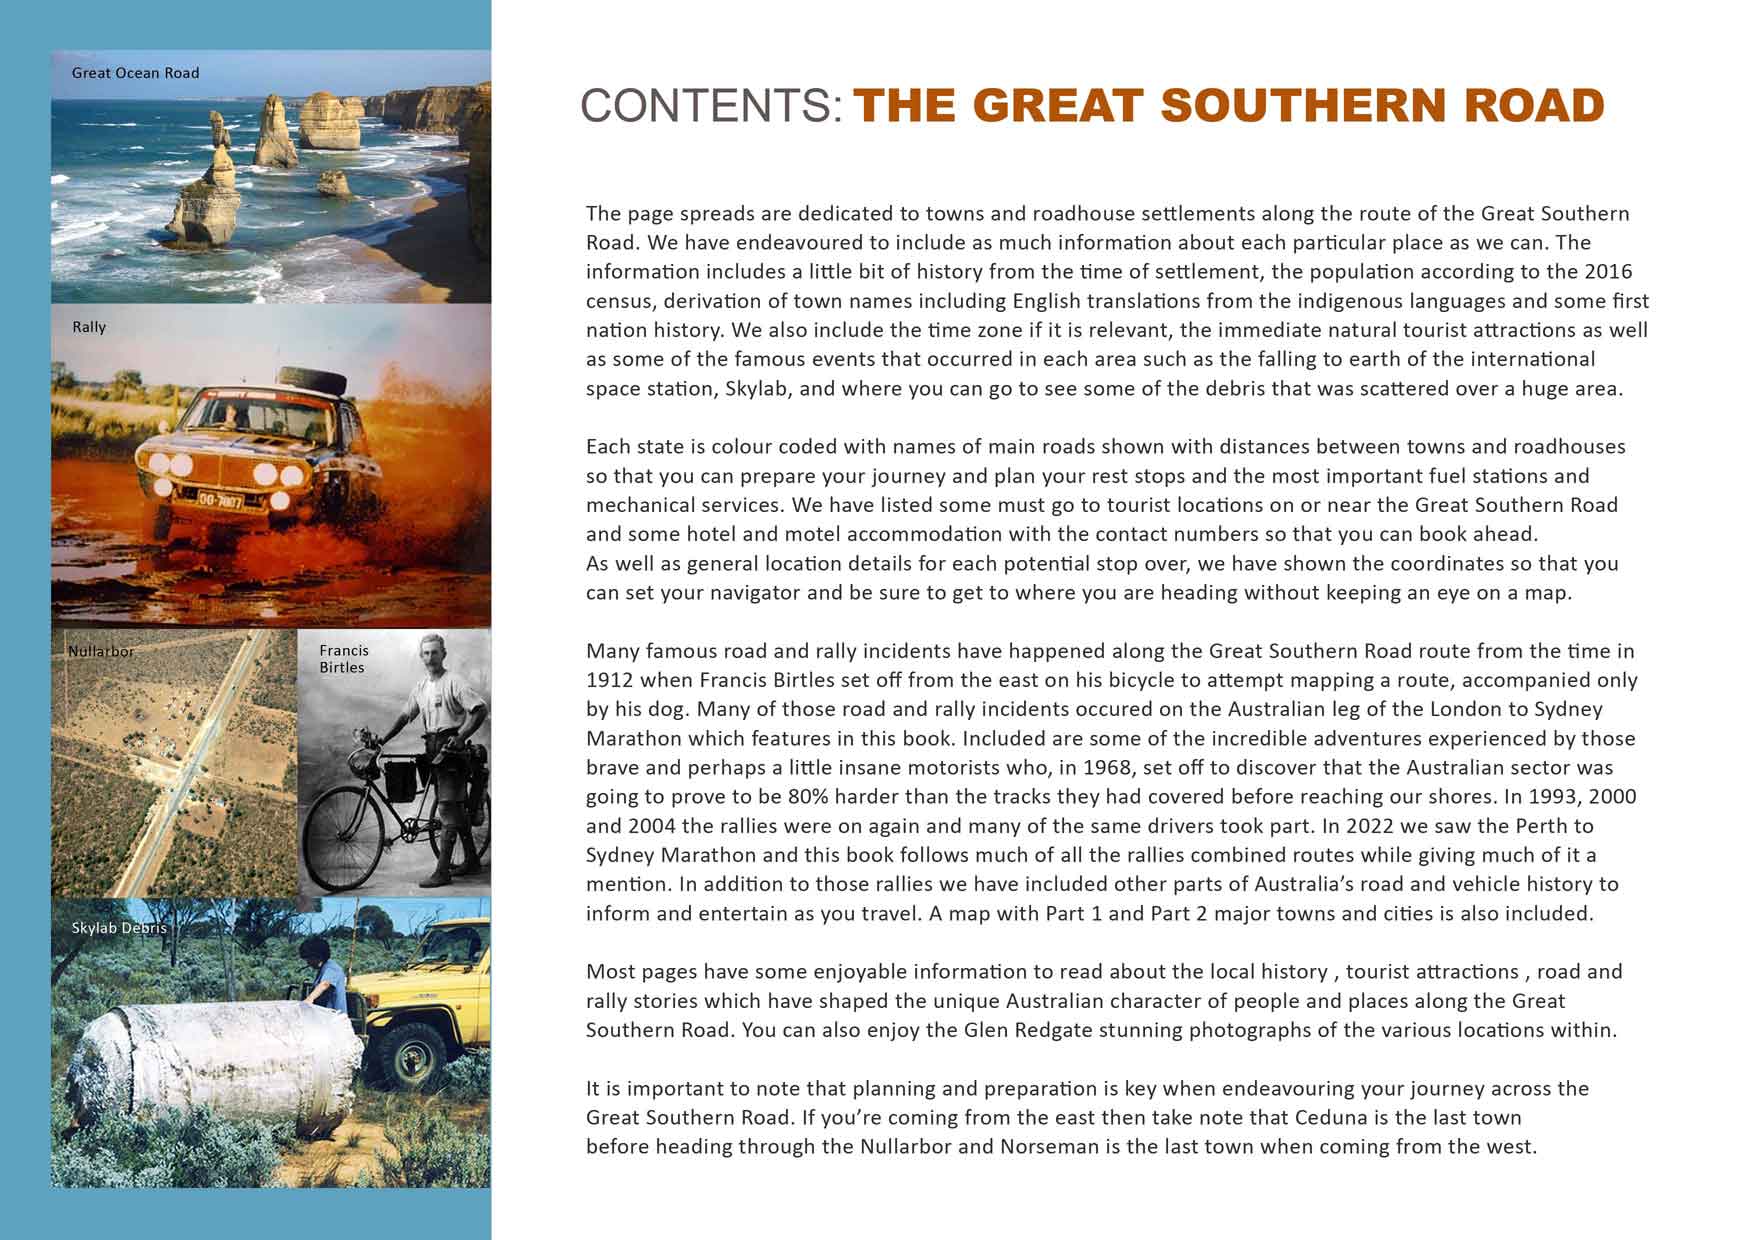 Great Southern Road - Contents